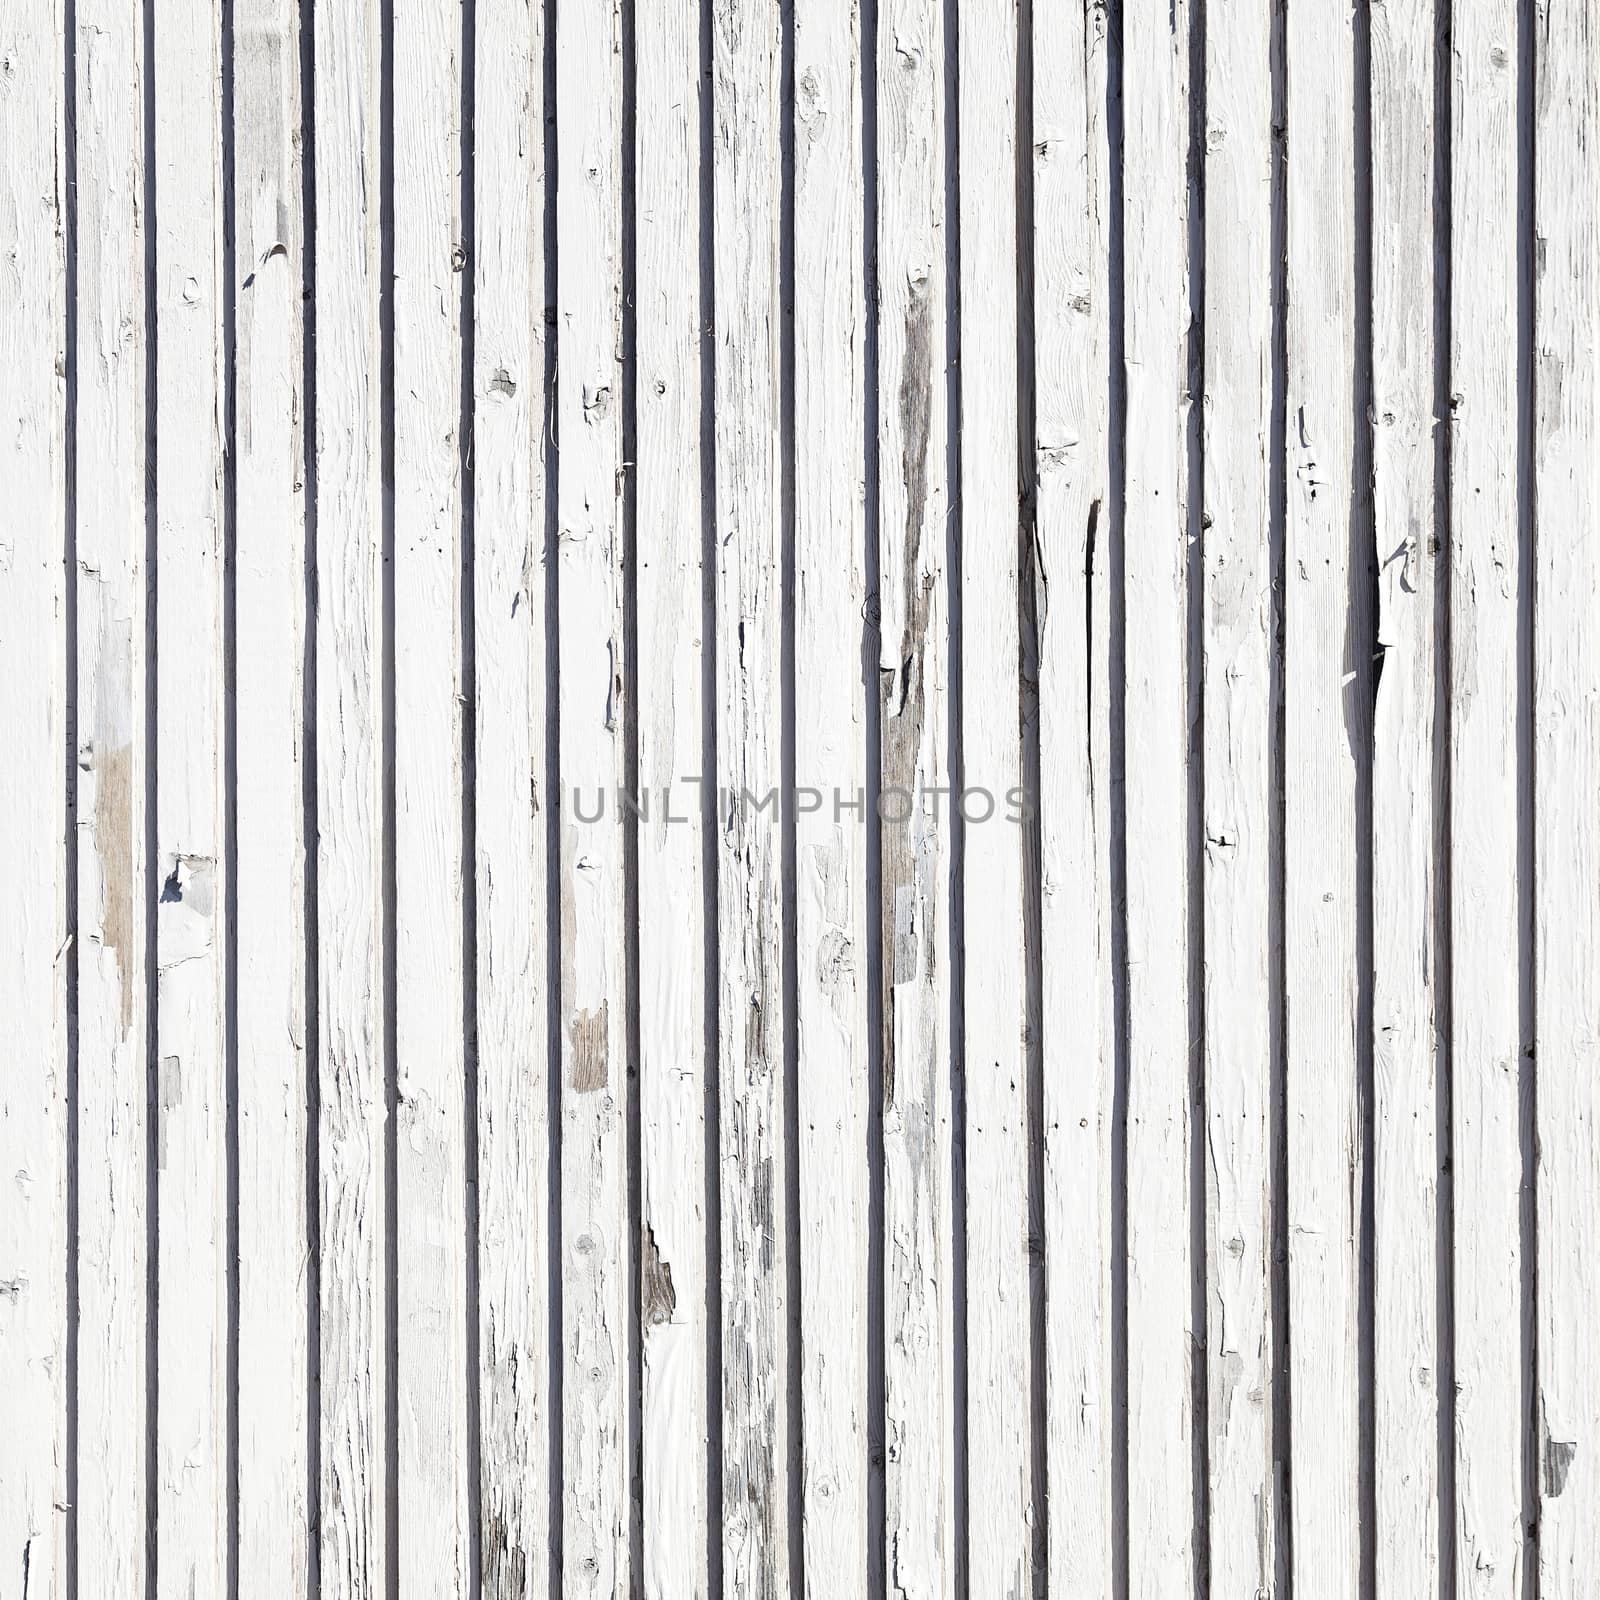 peeling white paint on square part of old derelict fence consisting of vertical planks